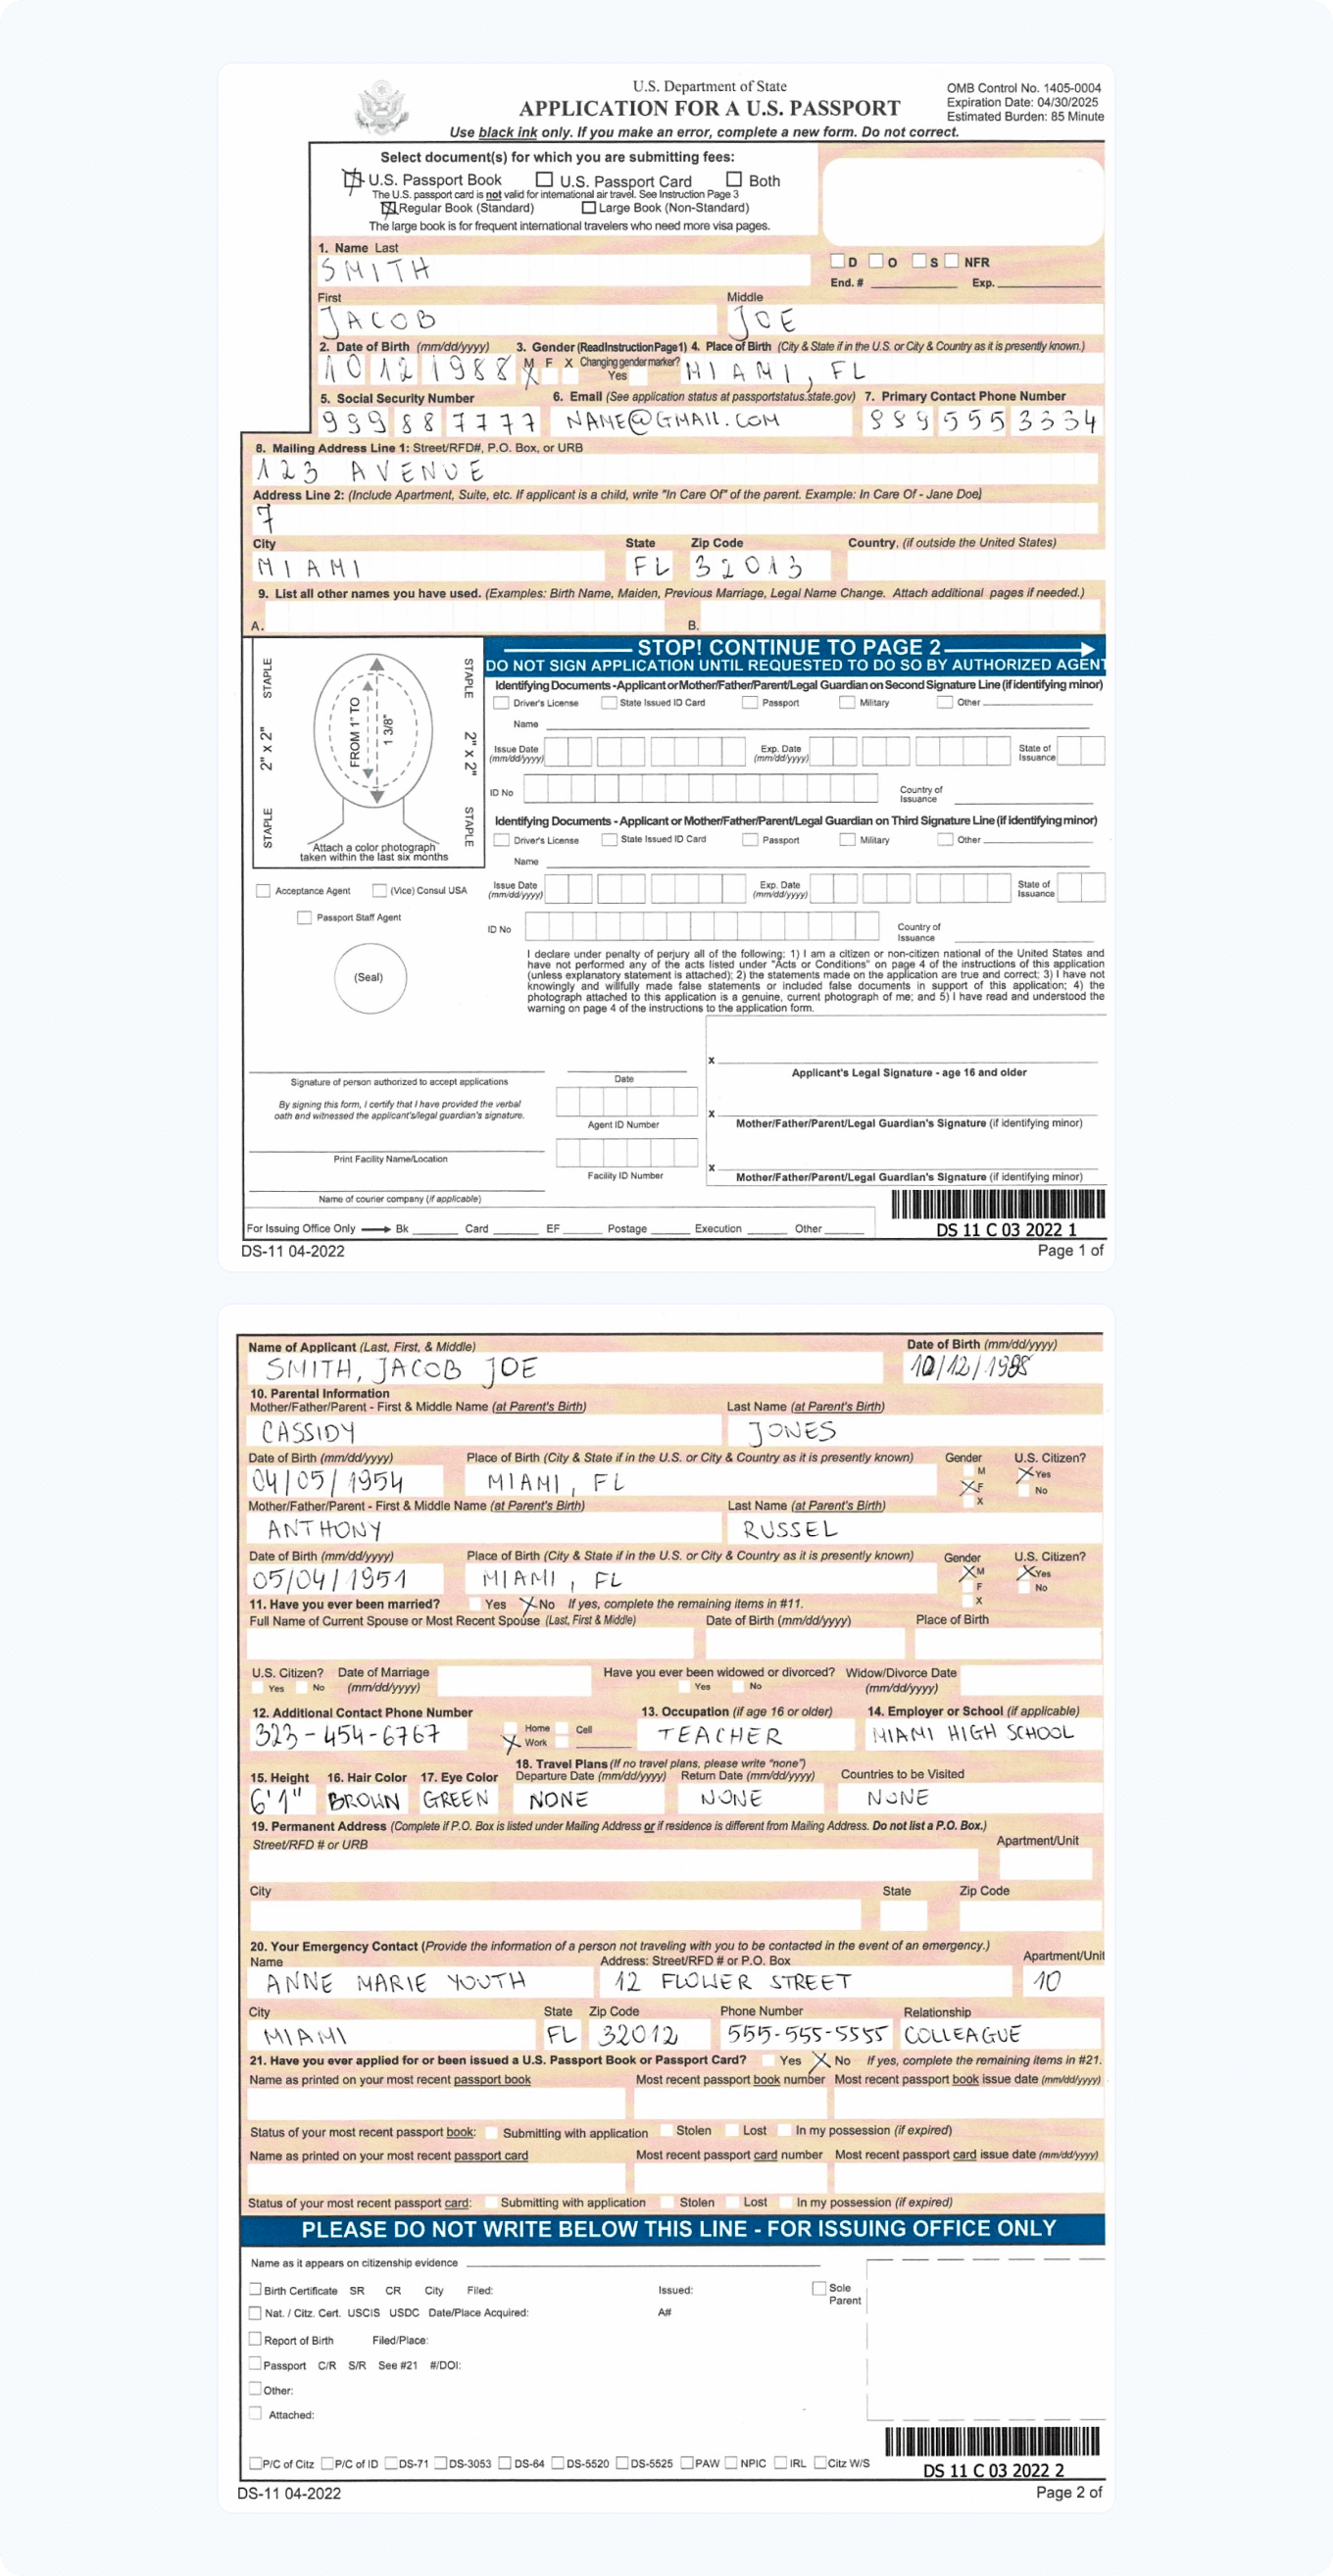 Example of a filled-out form DS-11